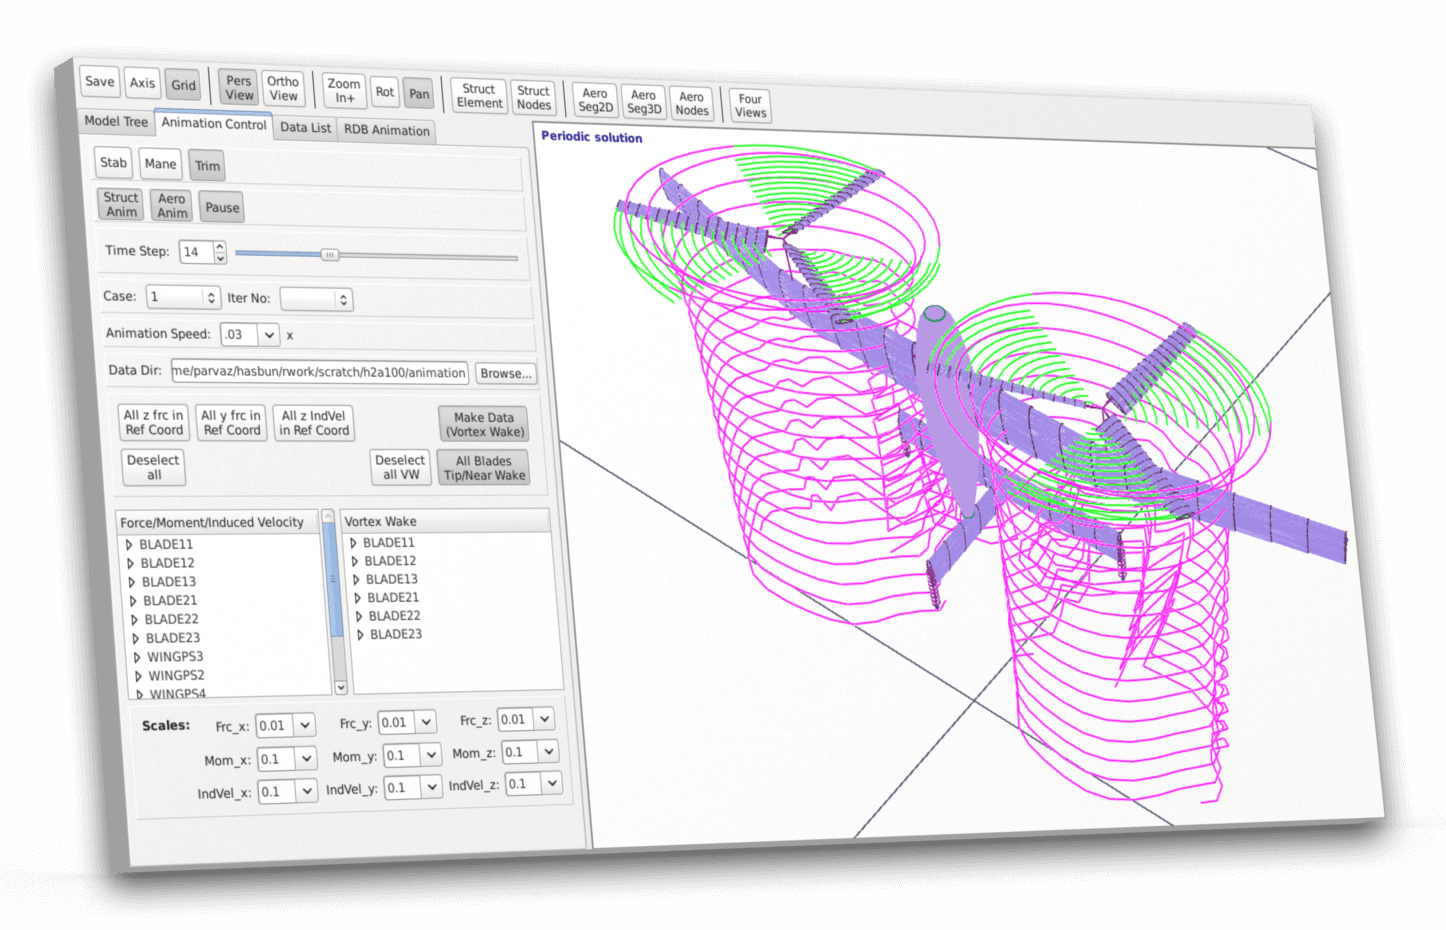 Image shows a rotorcaft model loaded into the GRCAS Software Model Viewer. The rotorcraft model is being animated based on the user's input.